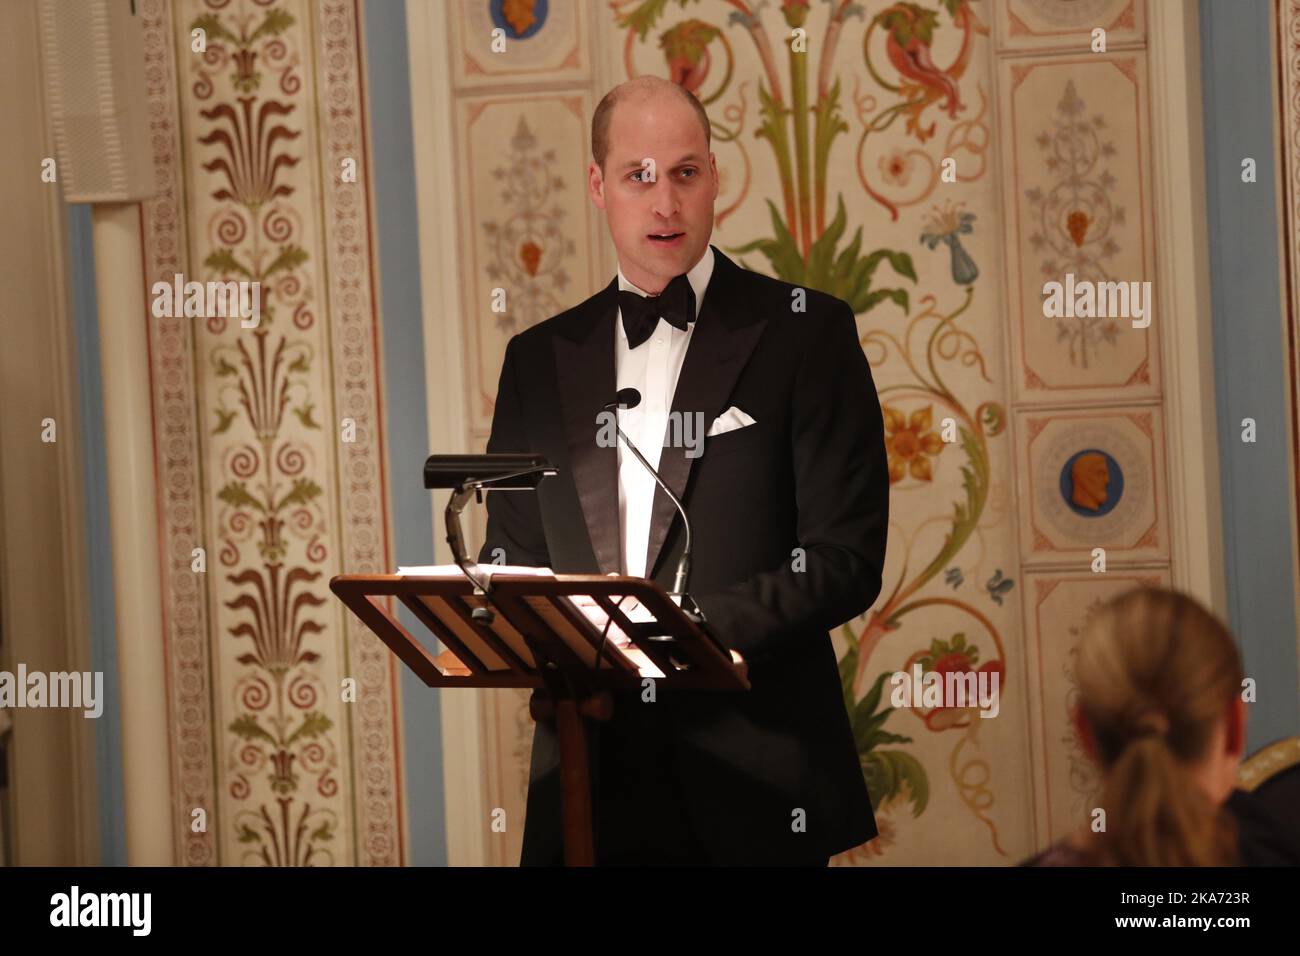 Oslo, Norway 20180201. Prince William of Great Britain and Duchess Kate visits Norway. Prince William, Duke of Cambridge speaks during the gala dinner at the Royal Palace on Thursday evening. Photo: Terje Bendiksby / NTB scanpix Stock Photo